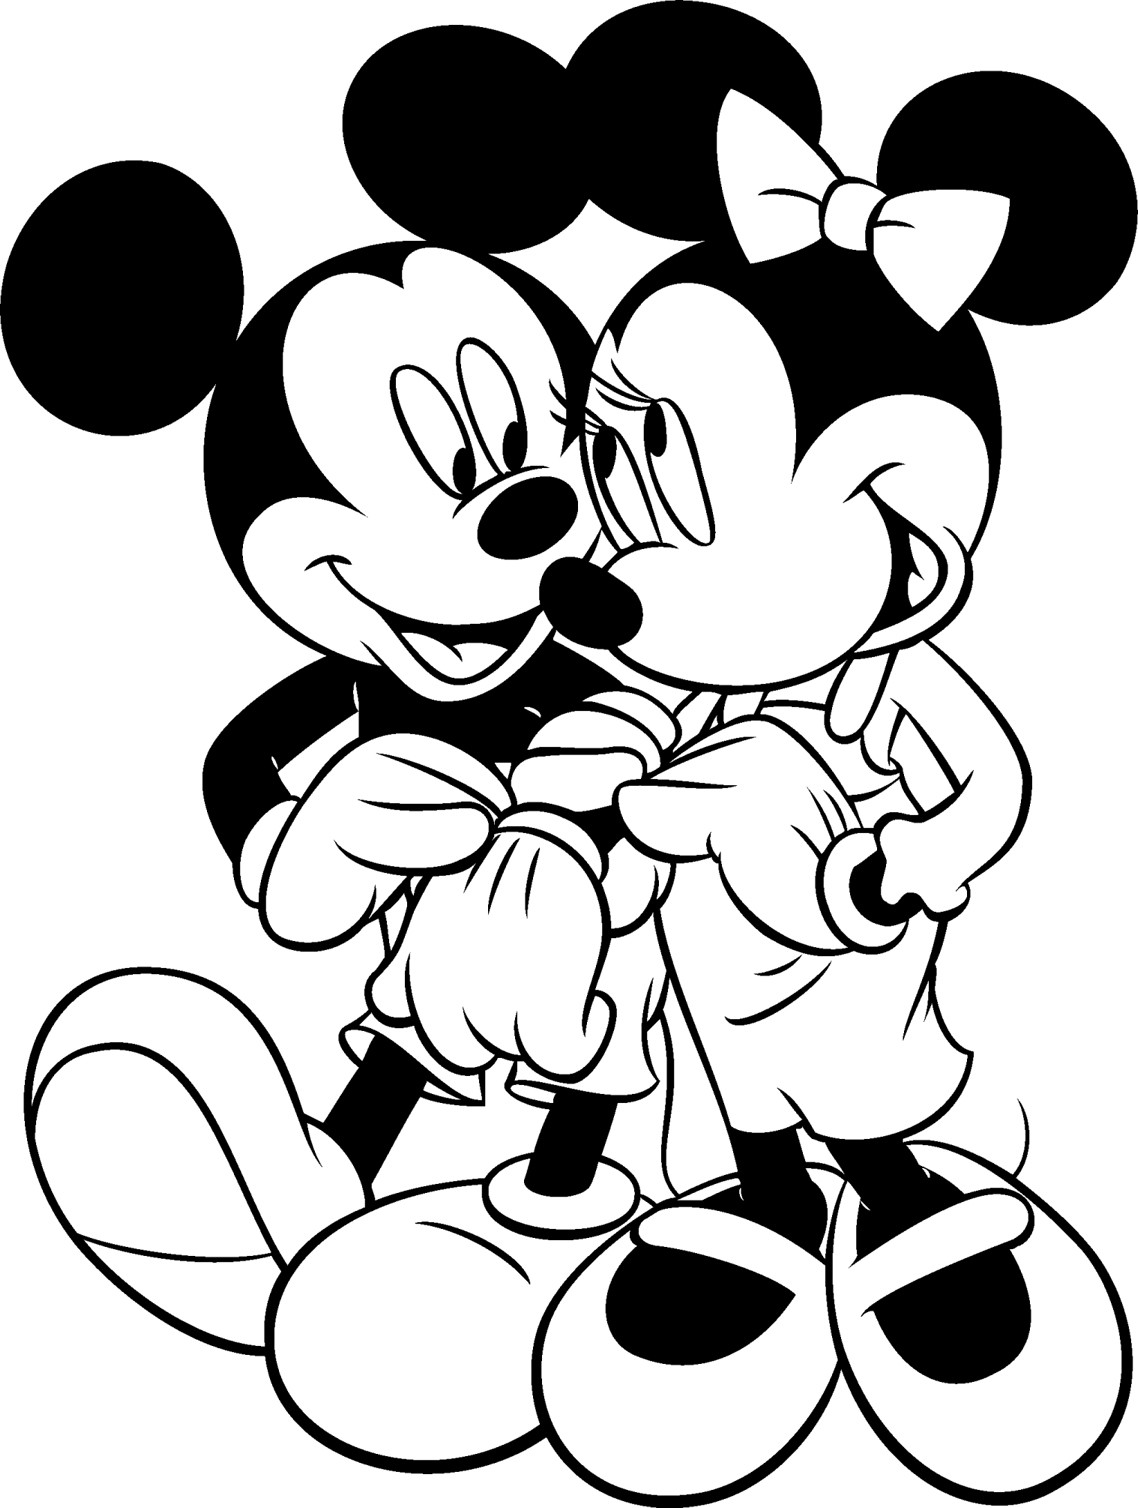 Printable Coloring Pages Disney
 DISNEY COLORING PAGES